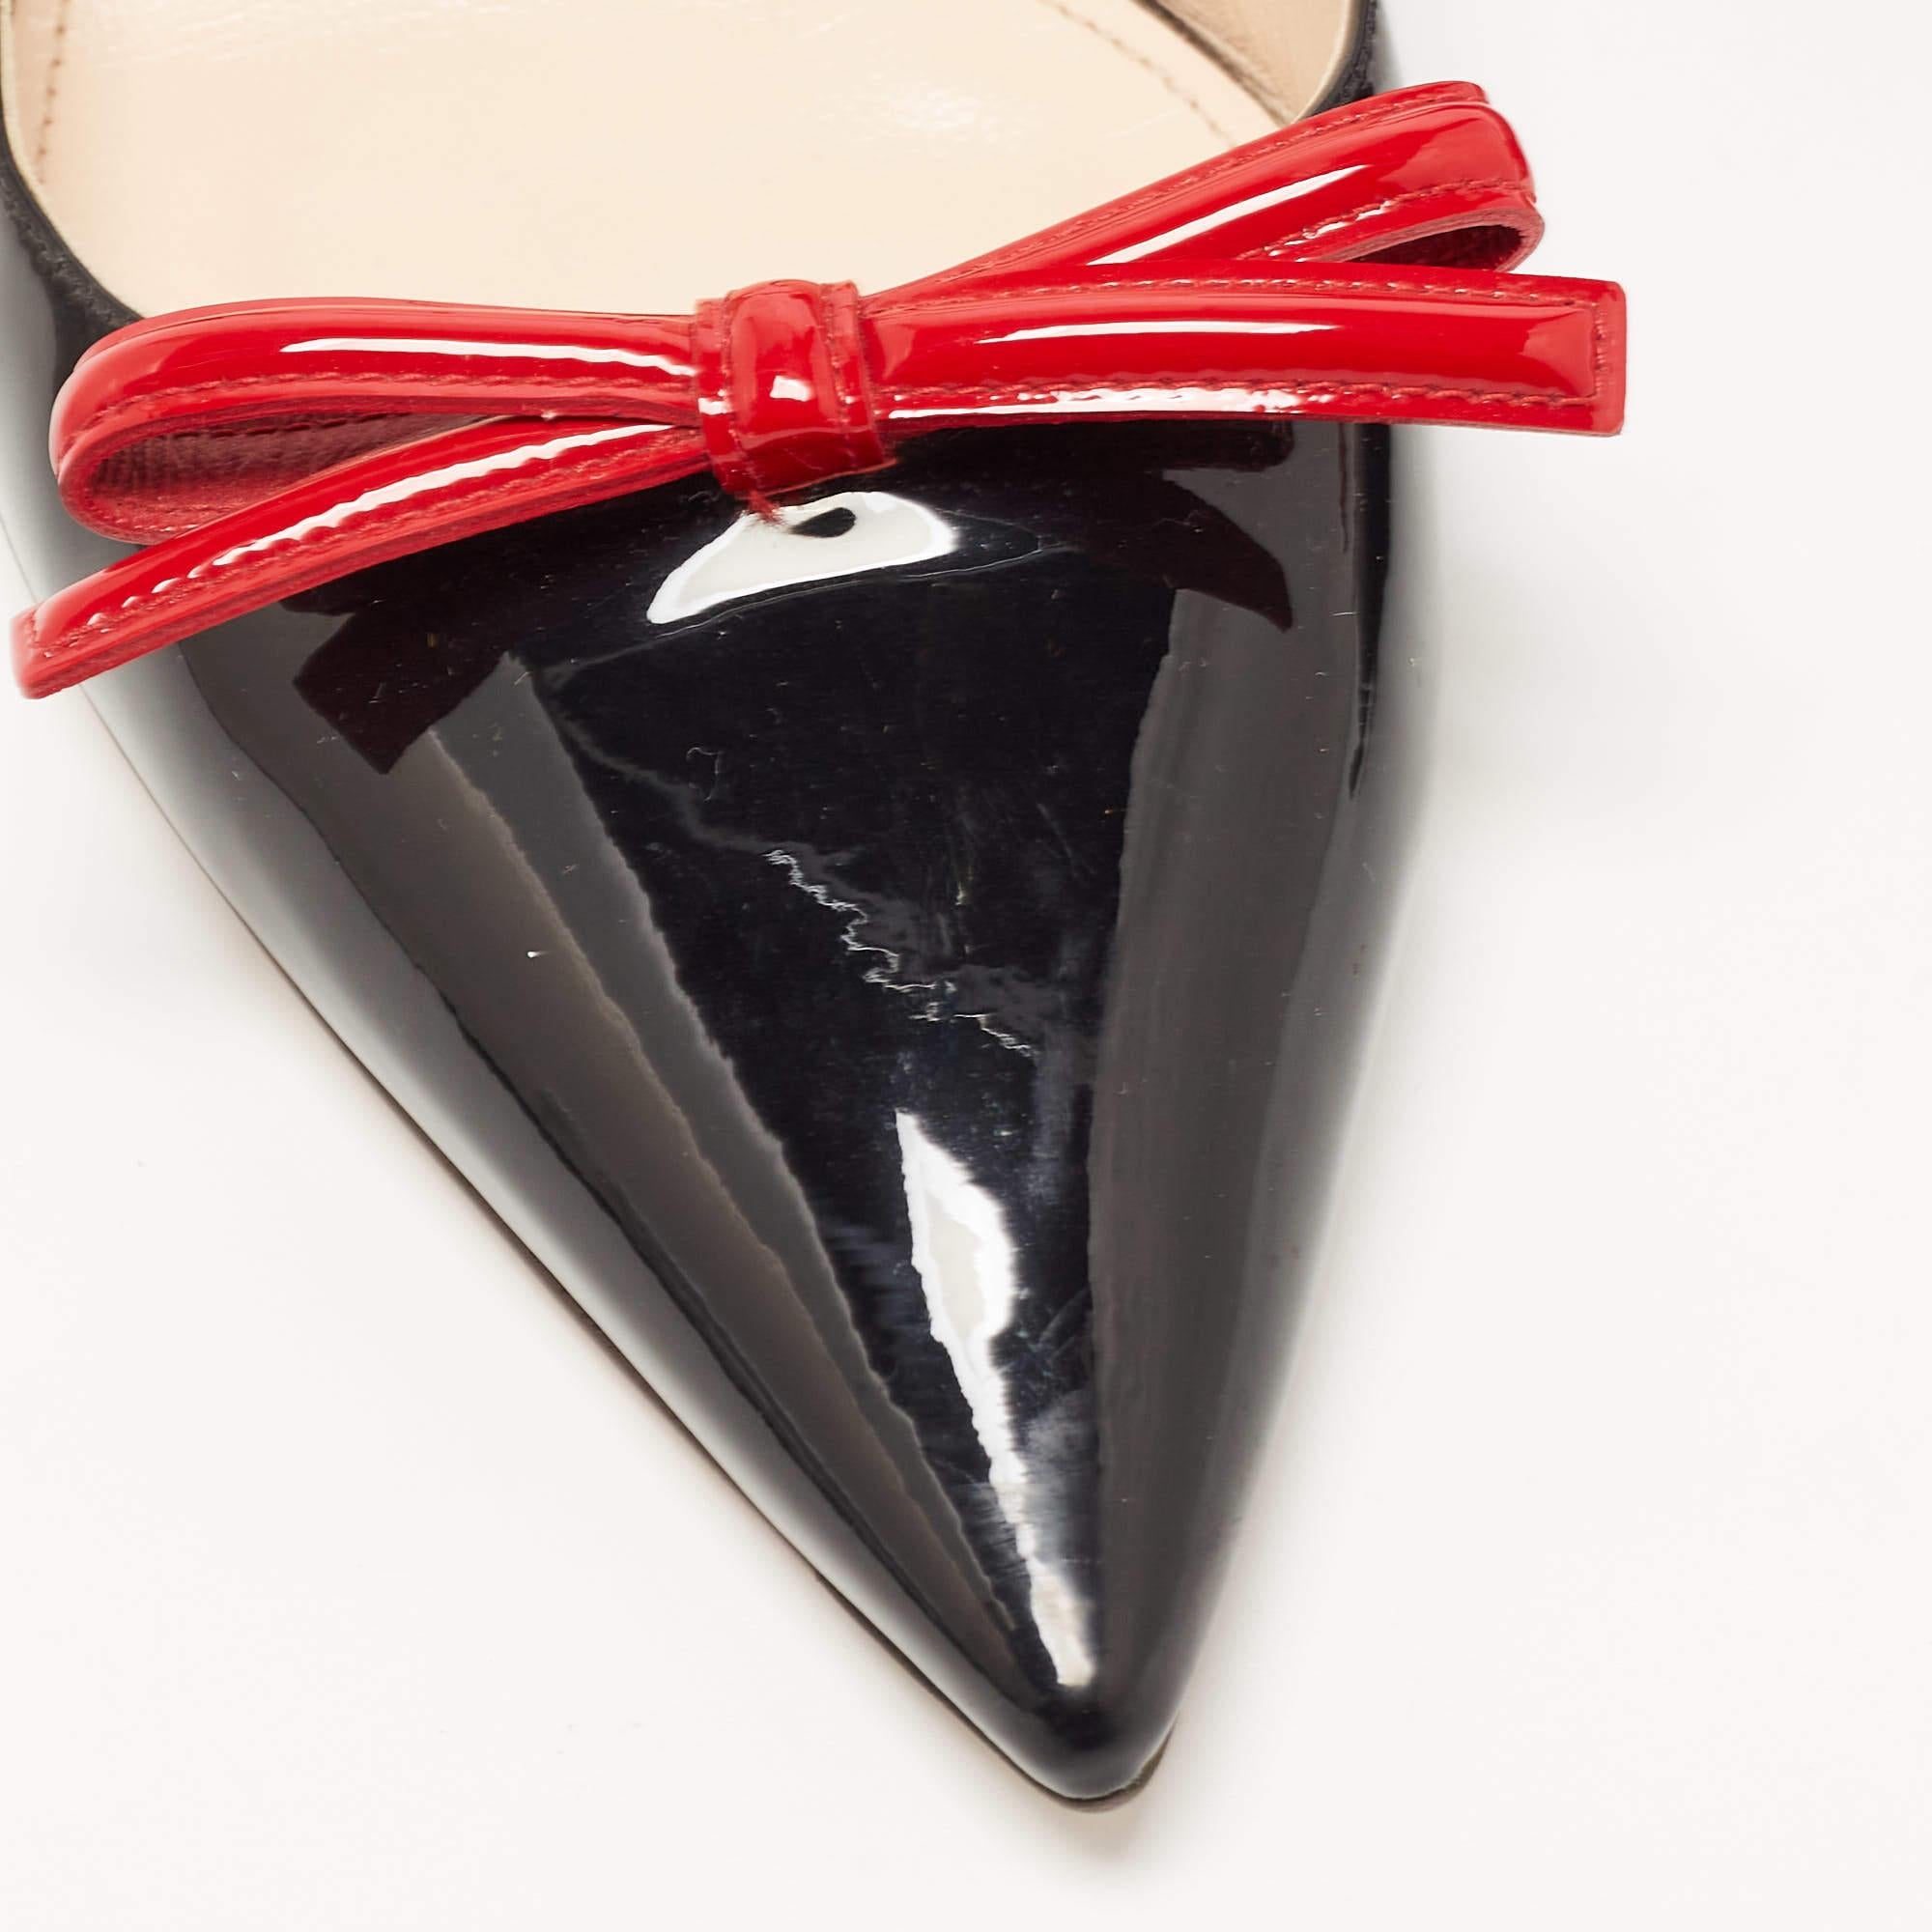 Prada Black/Red Patent Leather Bow Pointed Toe Slingback Sandals Size 40.5 4